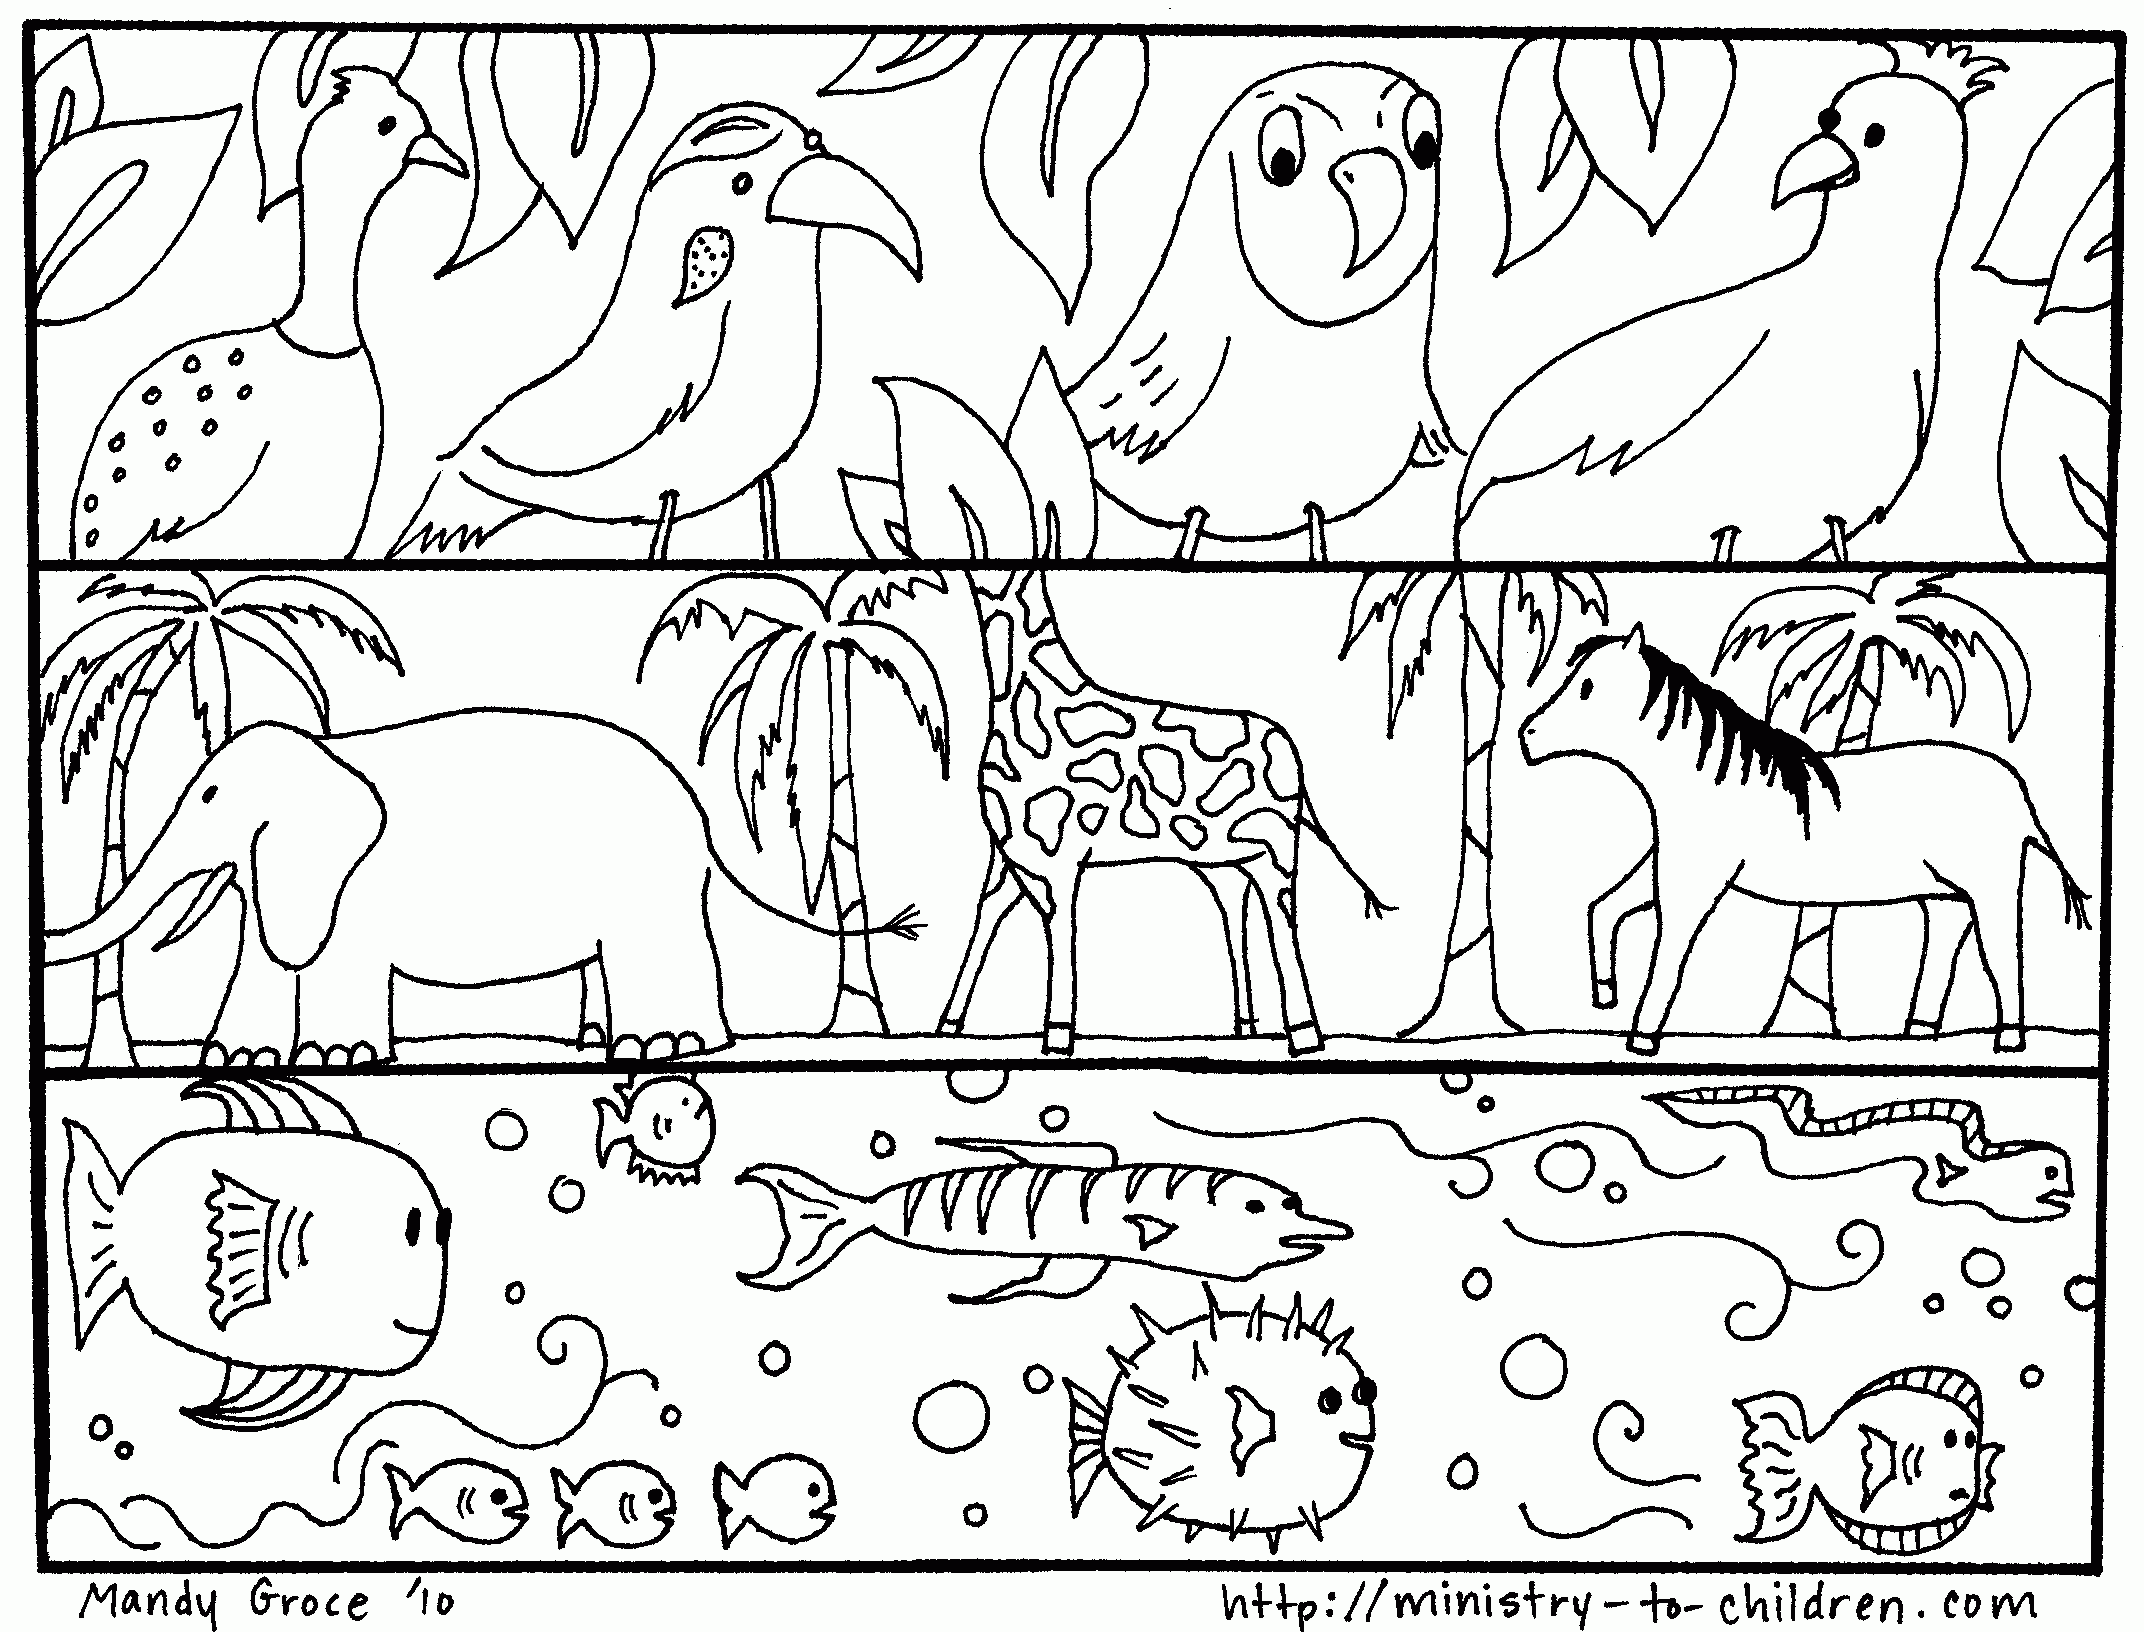 Creation Coloring Pages: God Made the Animals, Fish, Birds